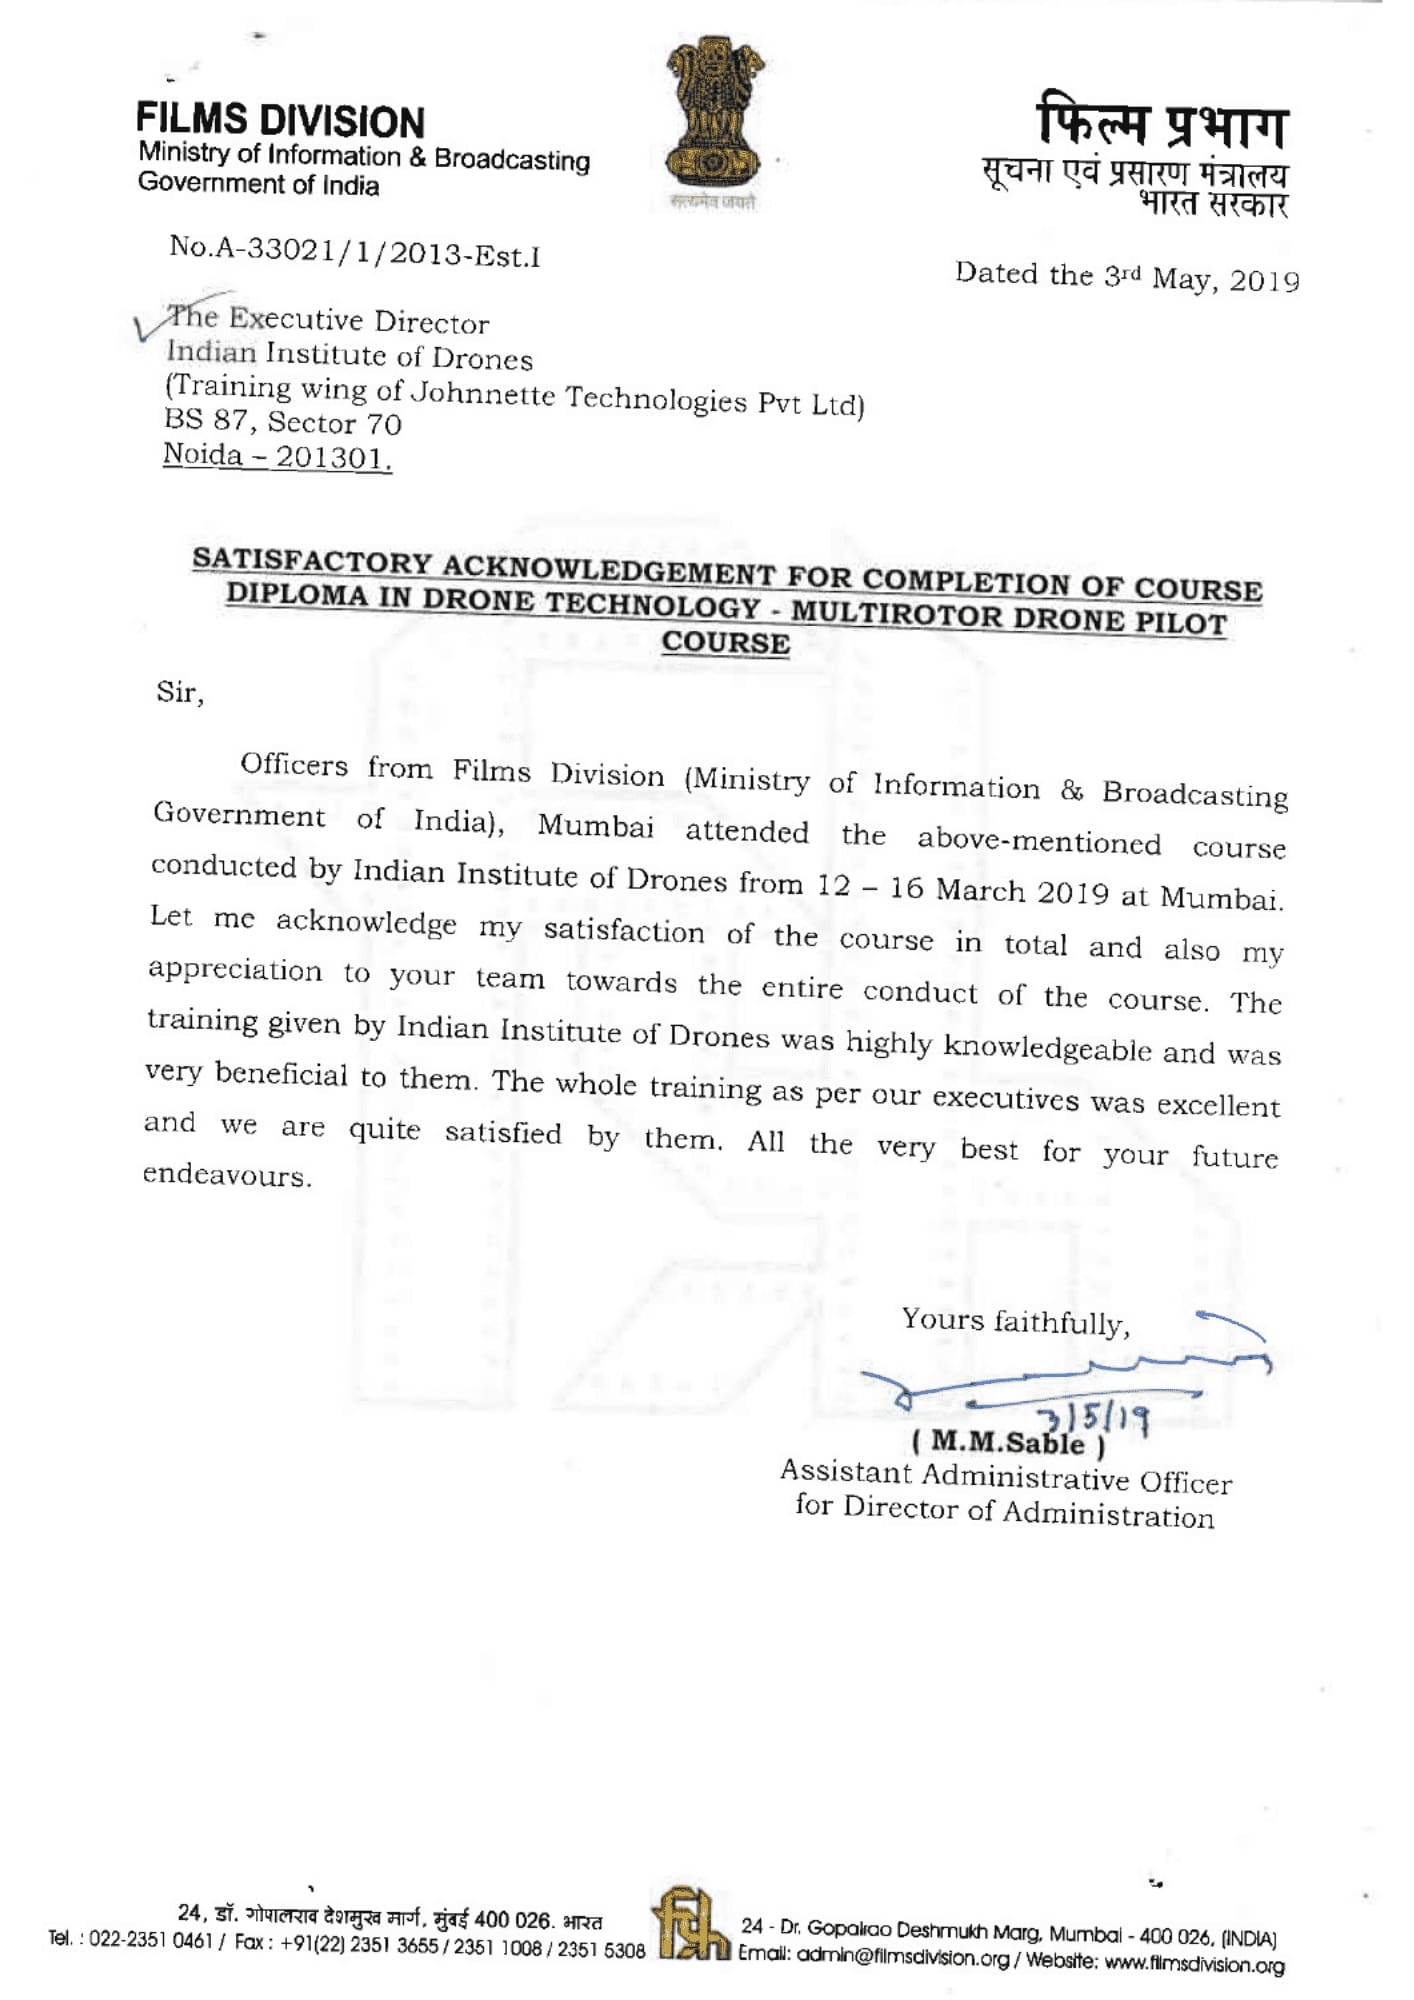 Satisfactory Letter for Drone Training Received from Films Divison, Ministry of Information and Broadcasting